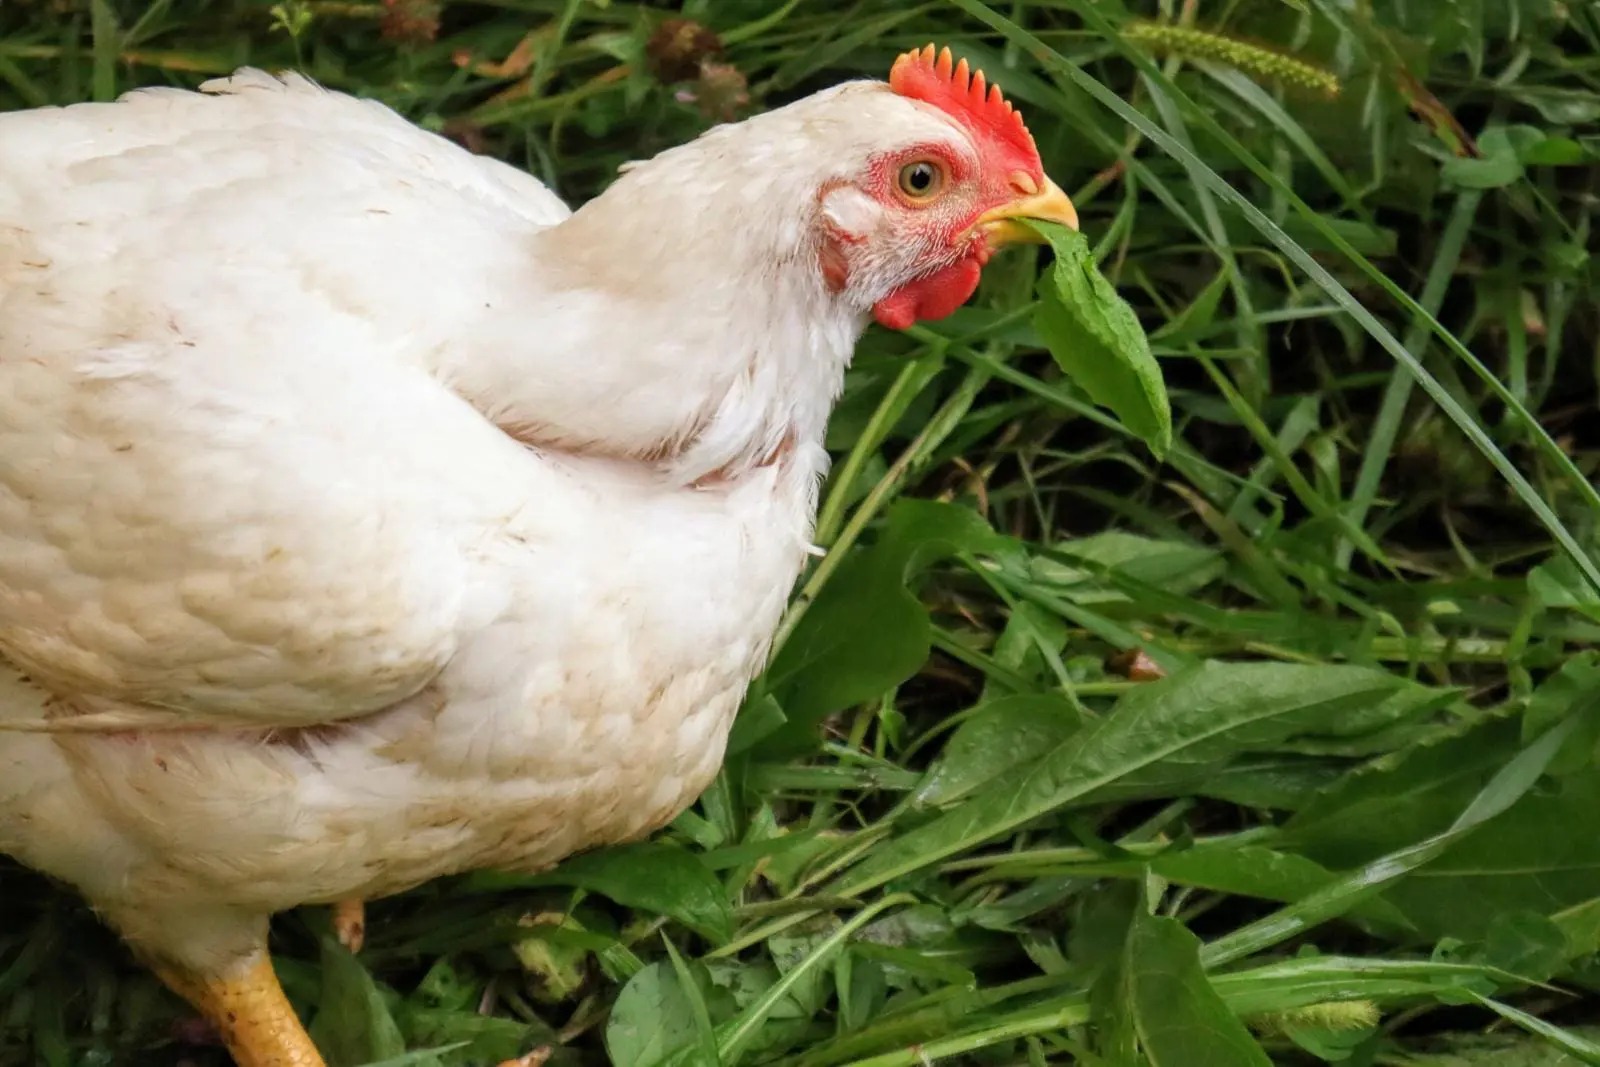 This Chicken's Surprising Grass-Eating Habit Will Leave You Speechless!